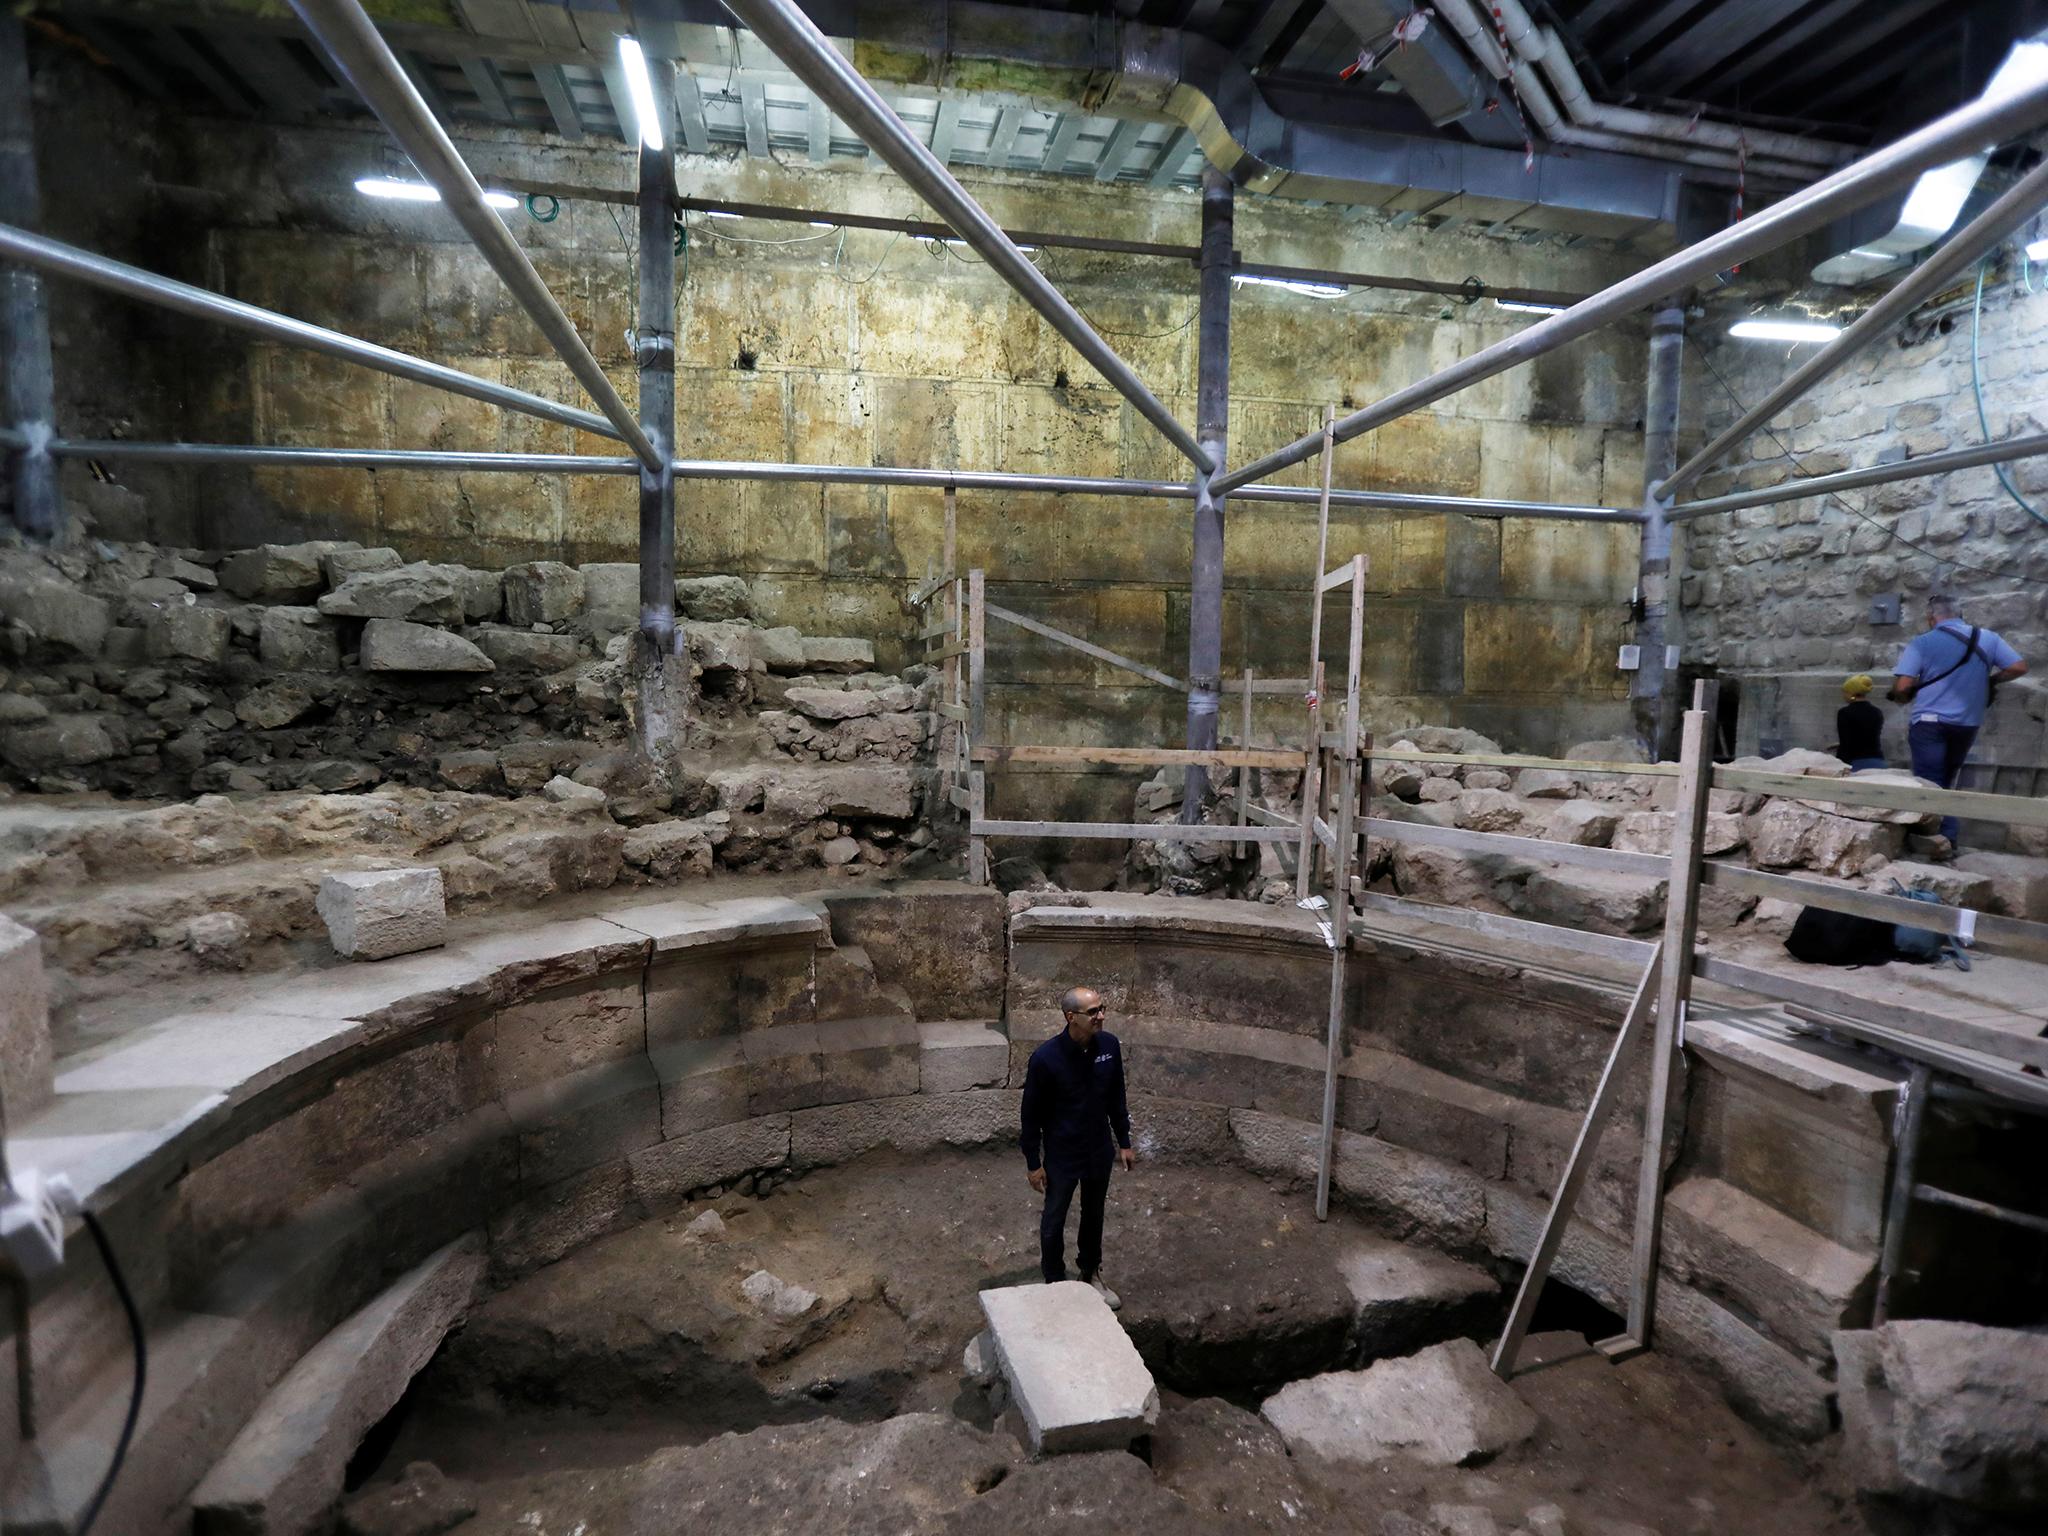 The theatre is the first rediscovered example of a Roman public building in Jerusalem